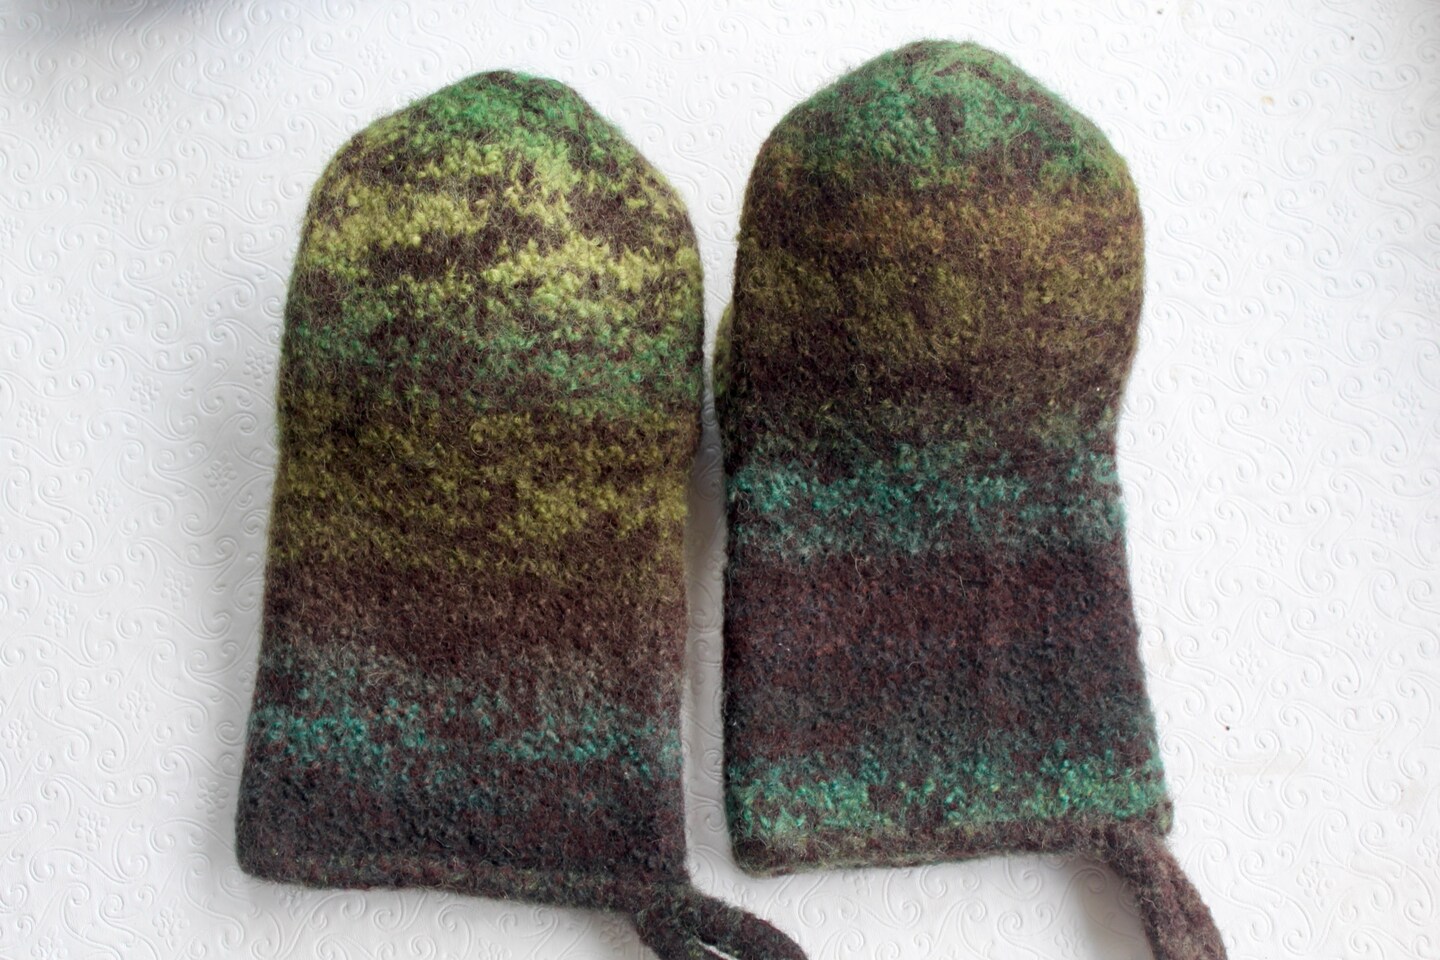 Heavy Duty Wool Oven Mitts, Hand Knit and Felted Oven Mitts, Creamy White,  Green, Pink, Brown Oven Mitts, Eco Friendly Home. 7th Anniversary 